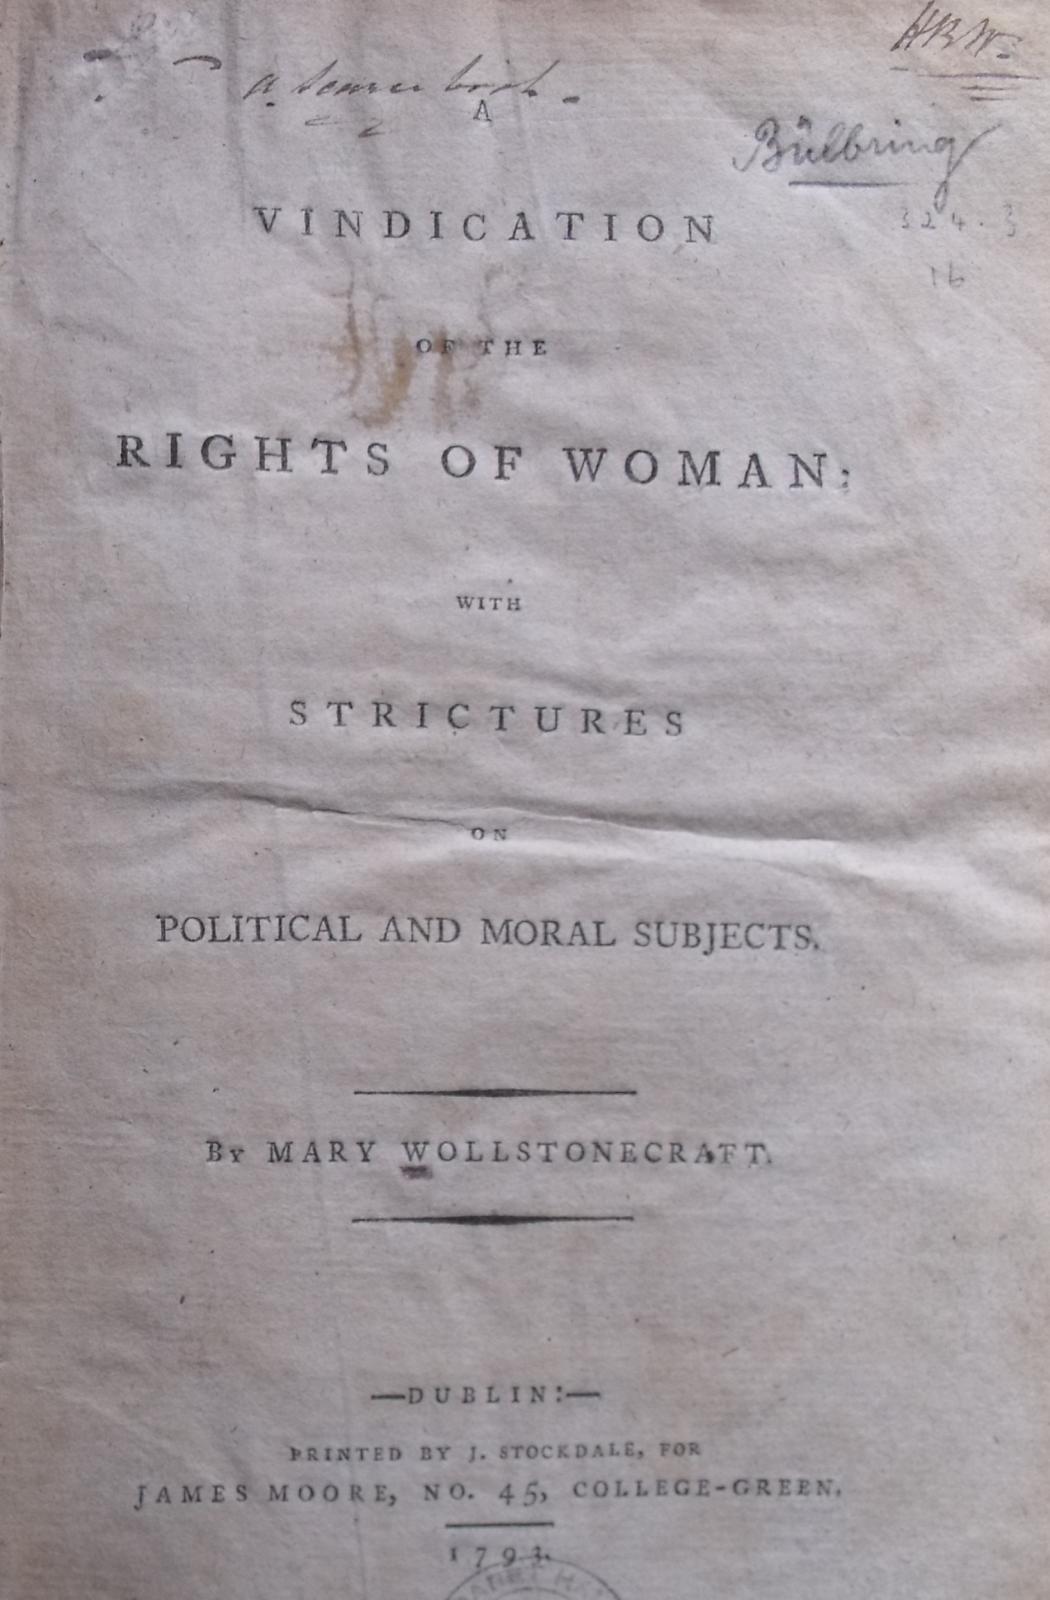 The LMH copy of Vindication of the Rights of Woman by Mary Wollstonecraft 